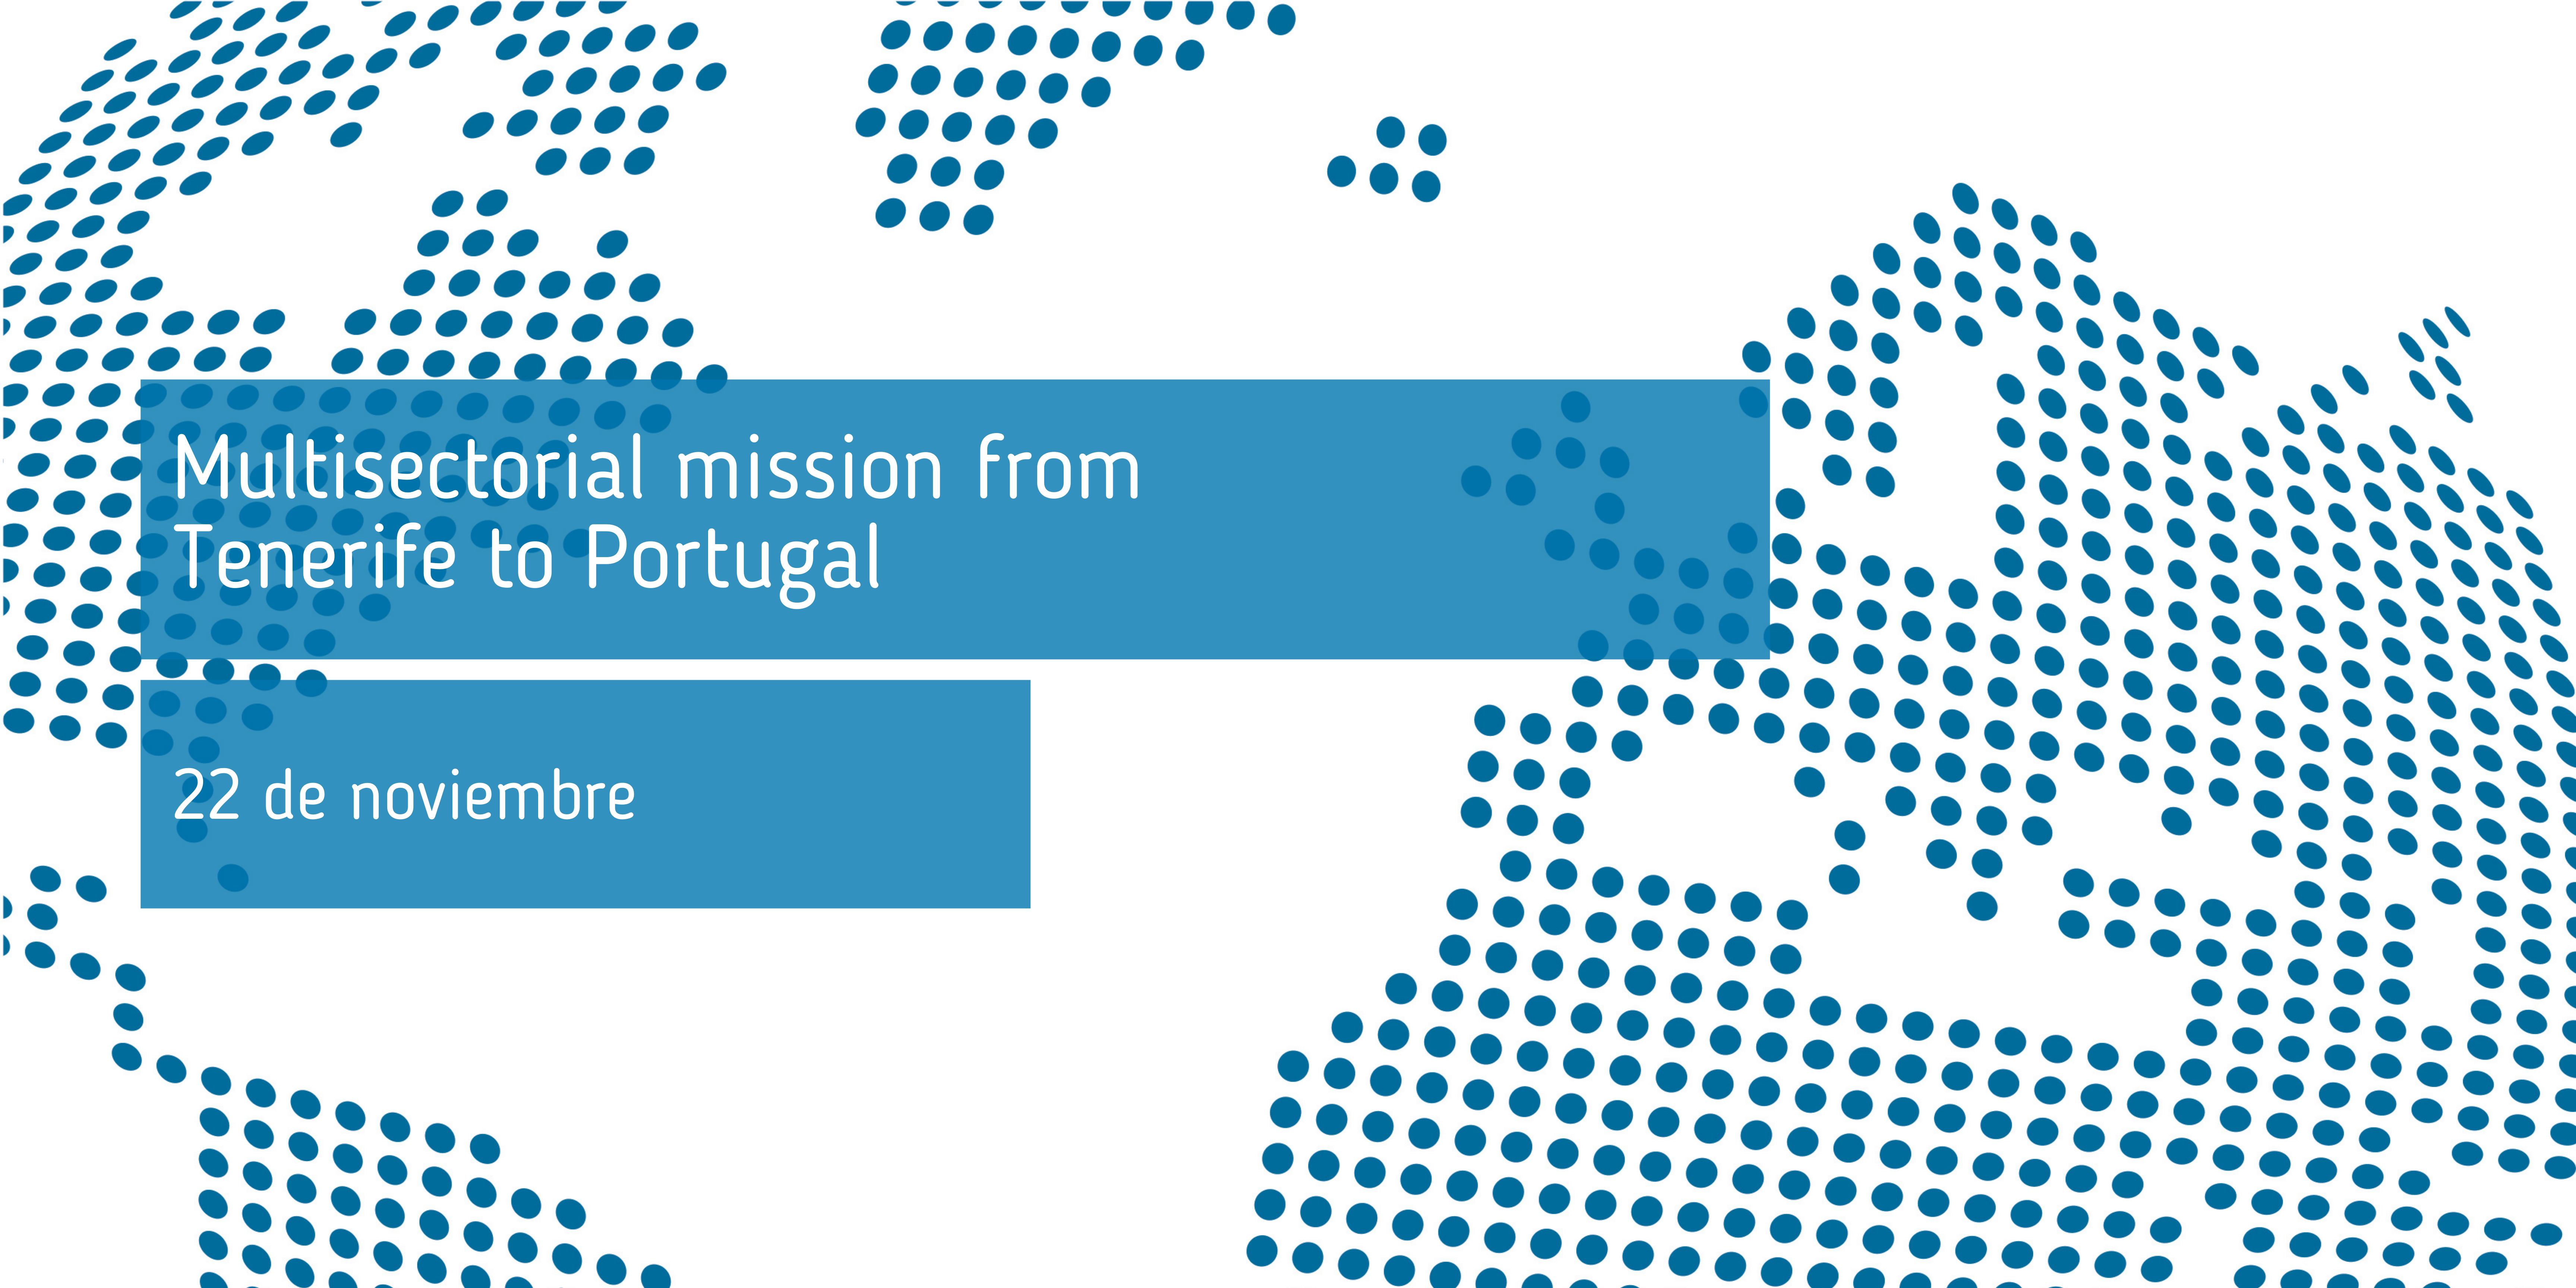 multisectorial_mission_from_tenerife_to_portugal